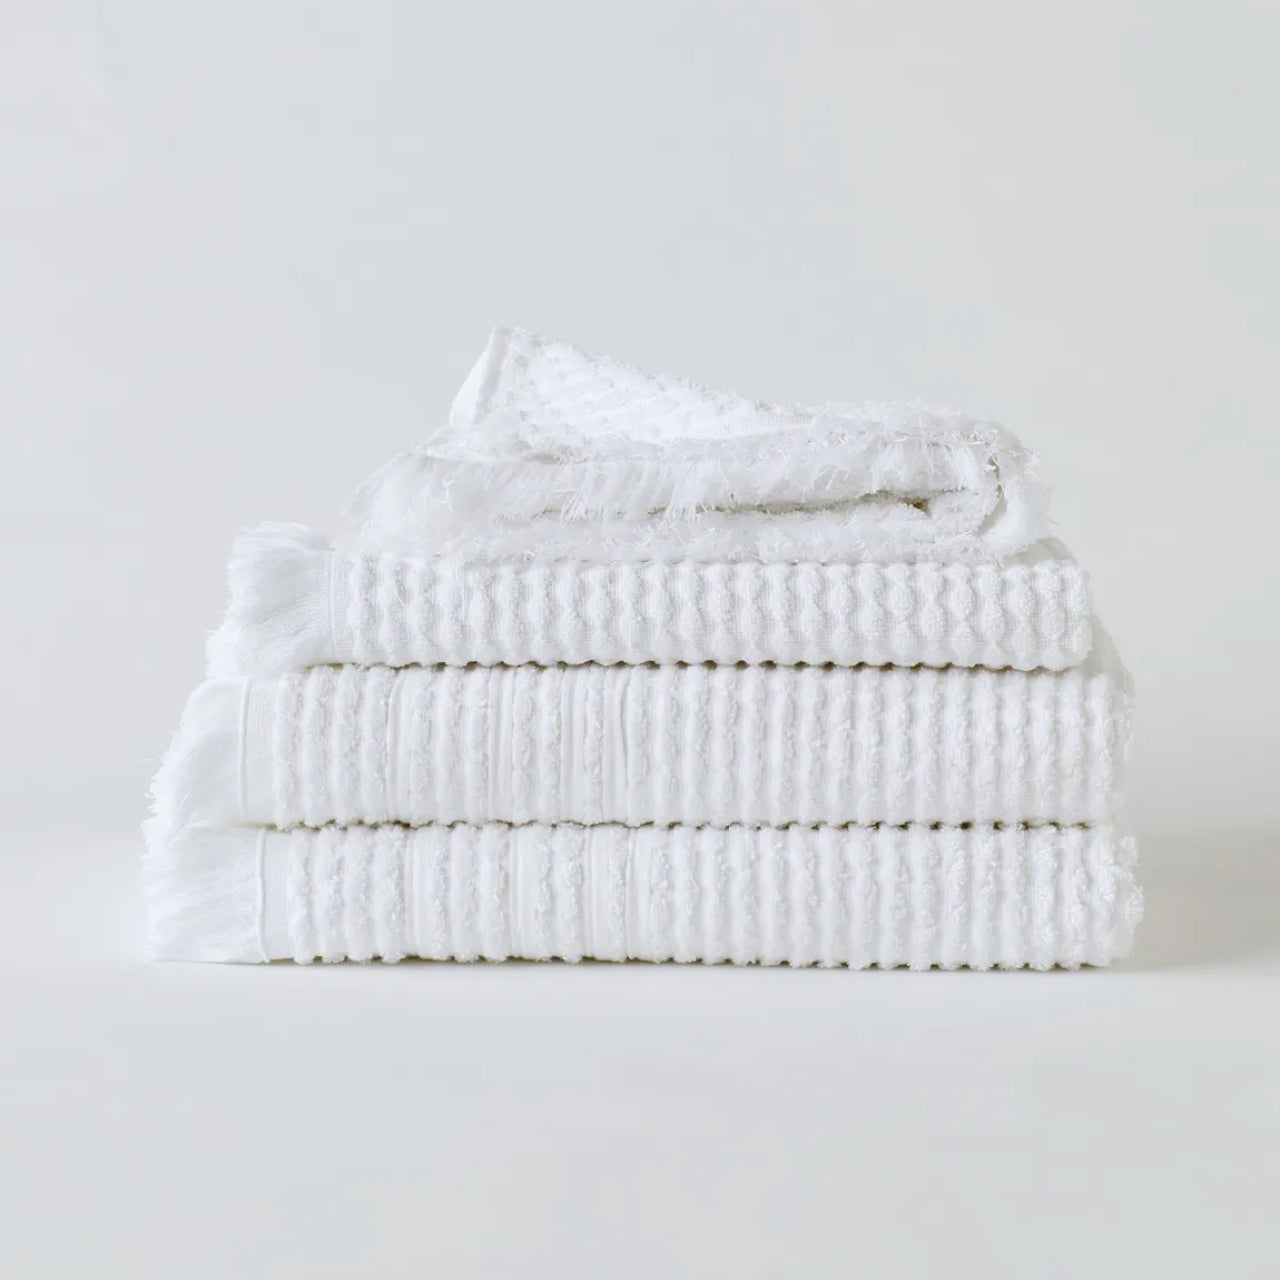 Group shot of Emine Towels White stacked